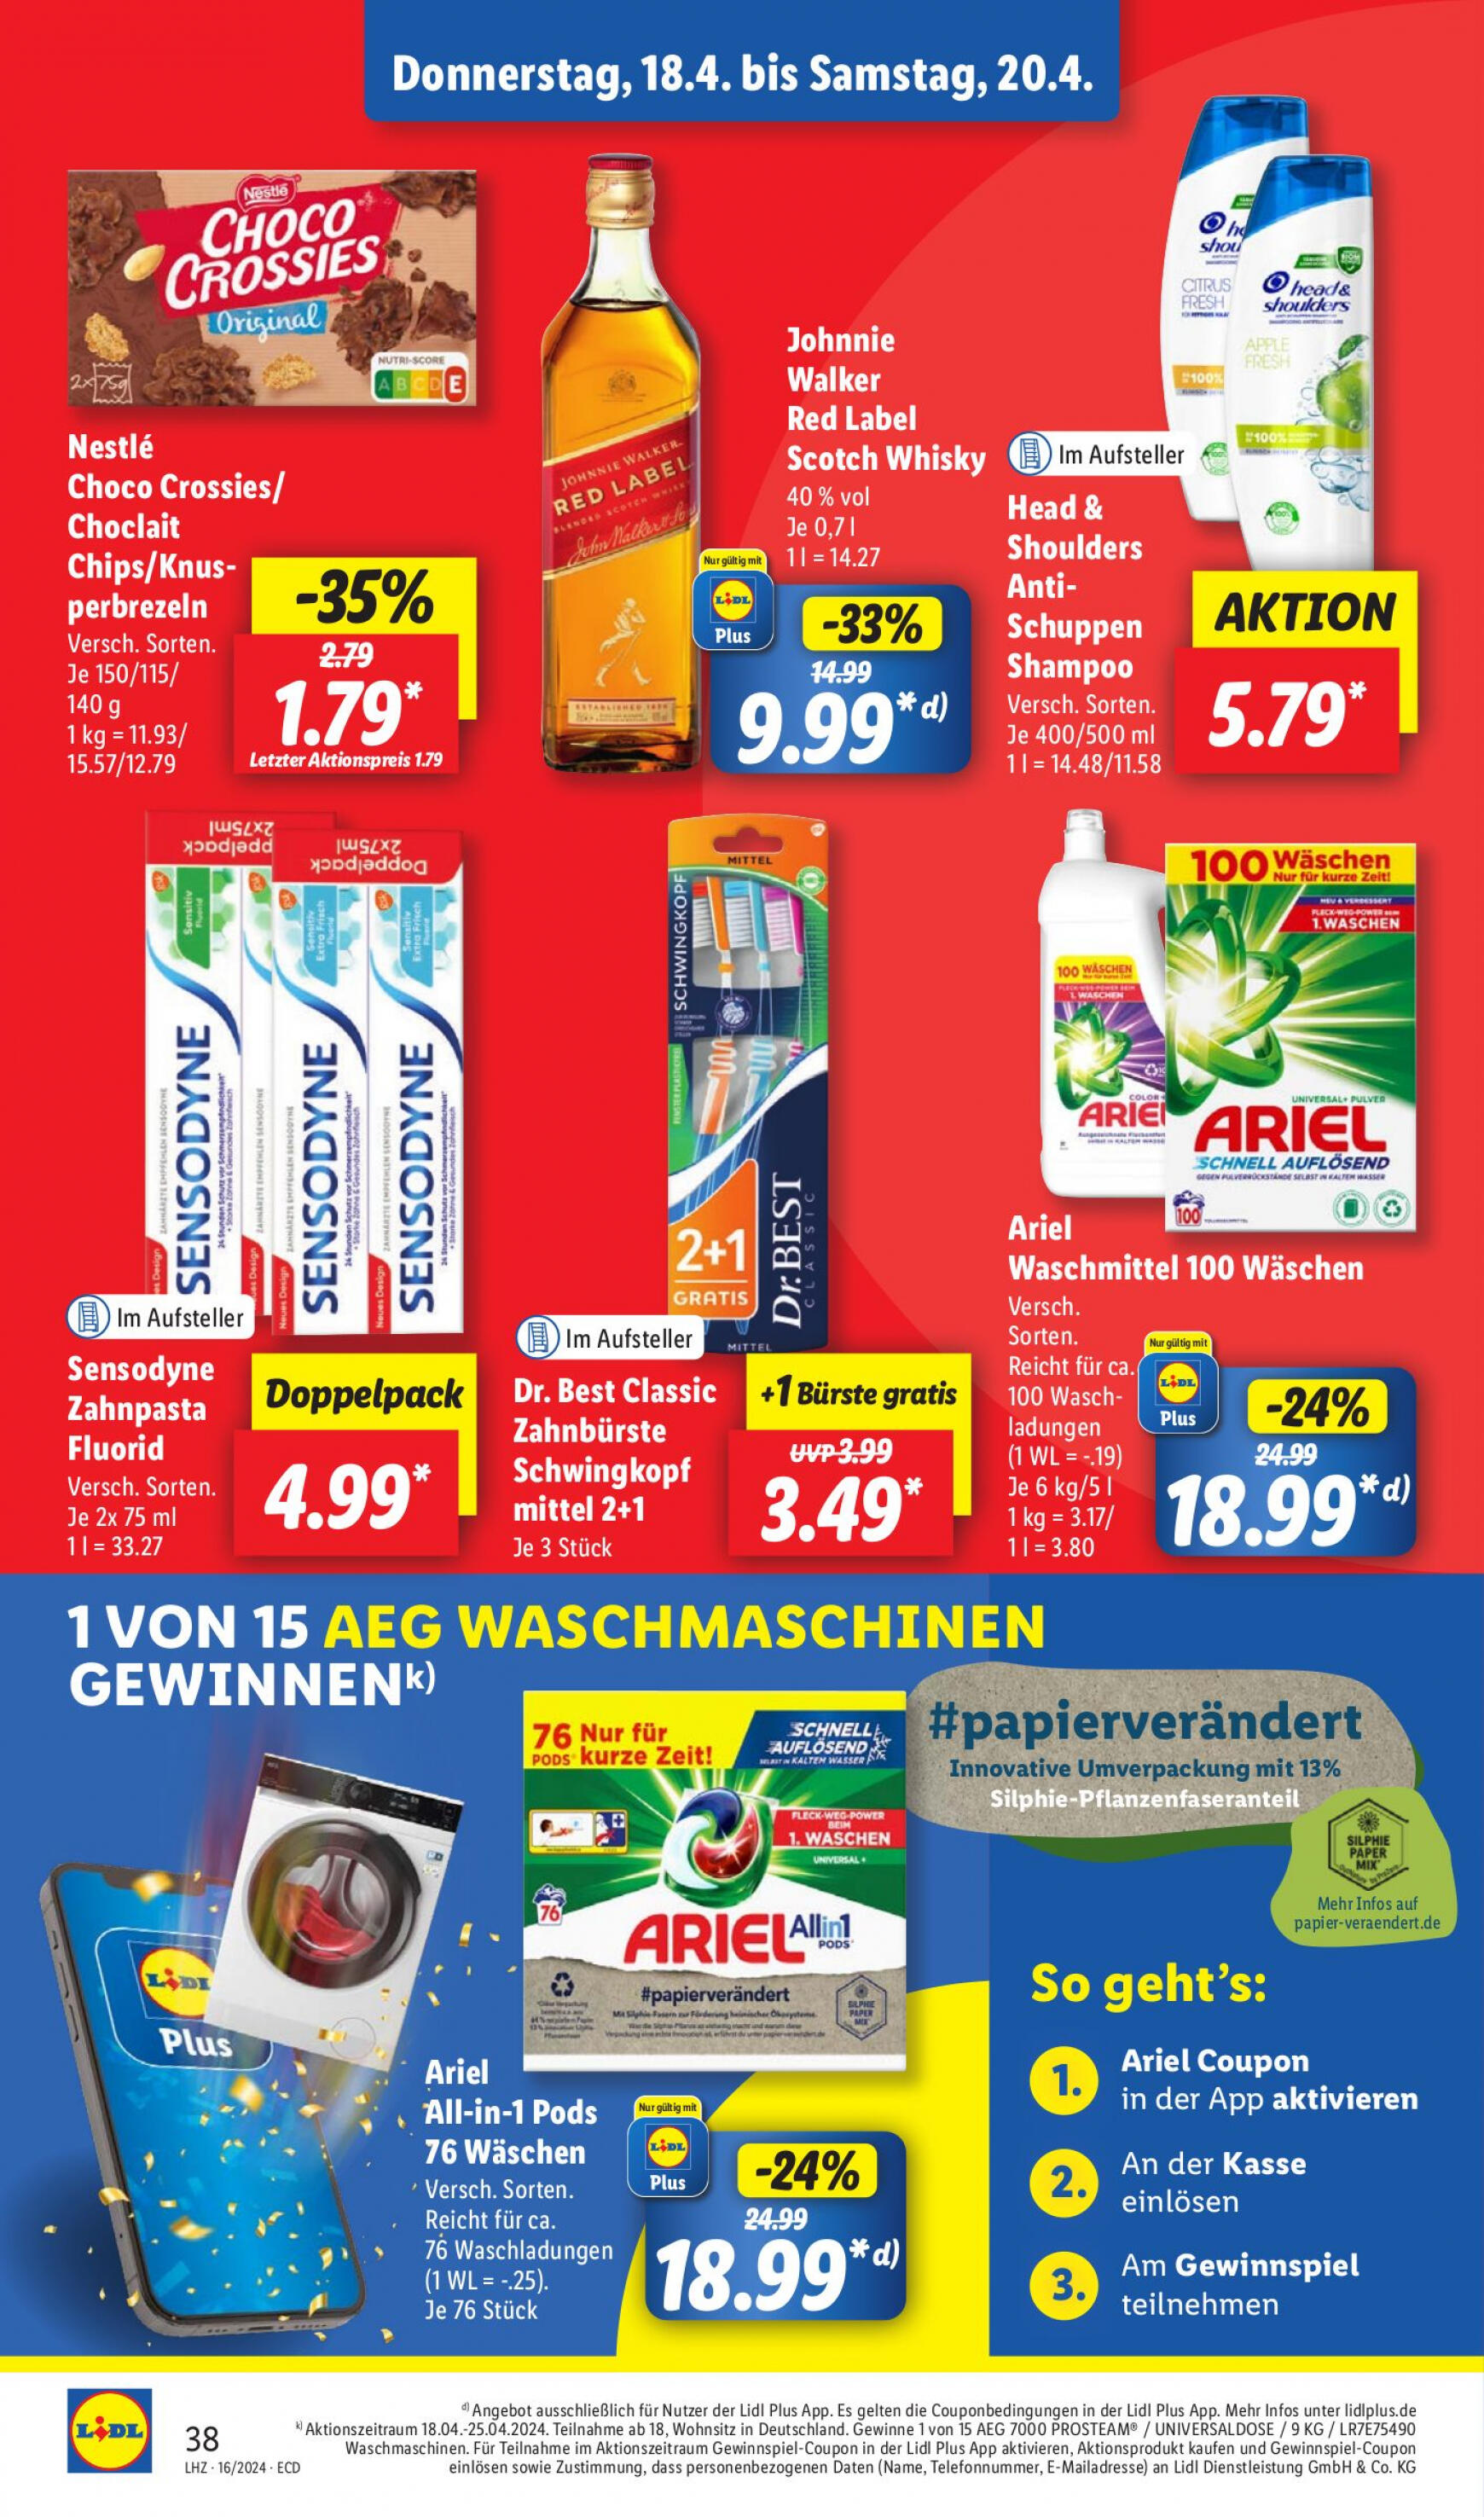 lidl - Flyer Lidl aktuell 15.04. - 20.04. - page: 48